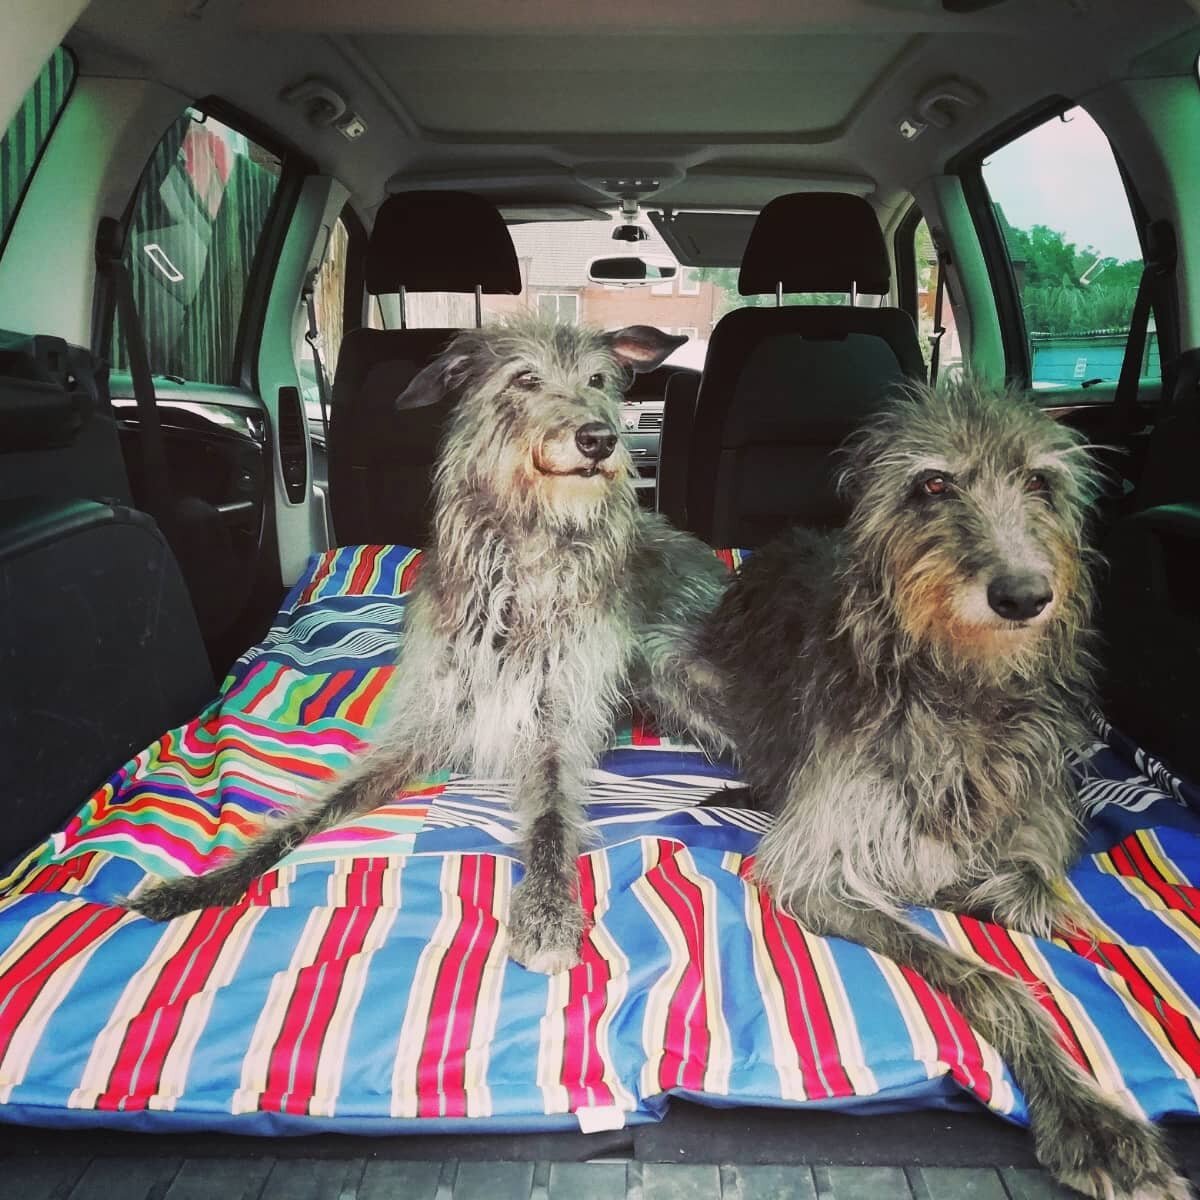 Sometimes you just gotta go BIG! 

Dora and Alice, prepped and ready for their staycation with their GINORMOUS travel mat and boot liner, are ready to hit the road. 

Have fun girls! 

Want to chat about your bespoke project? Please get in touch.